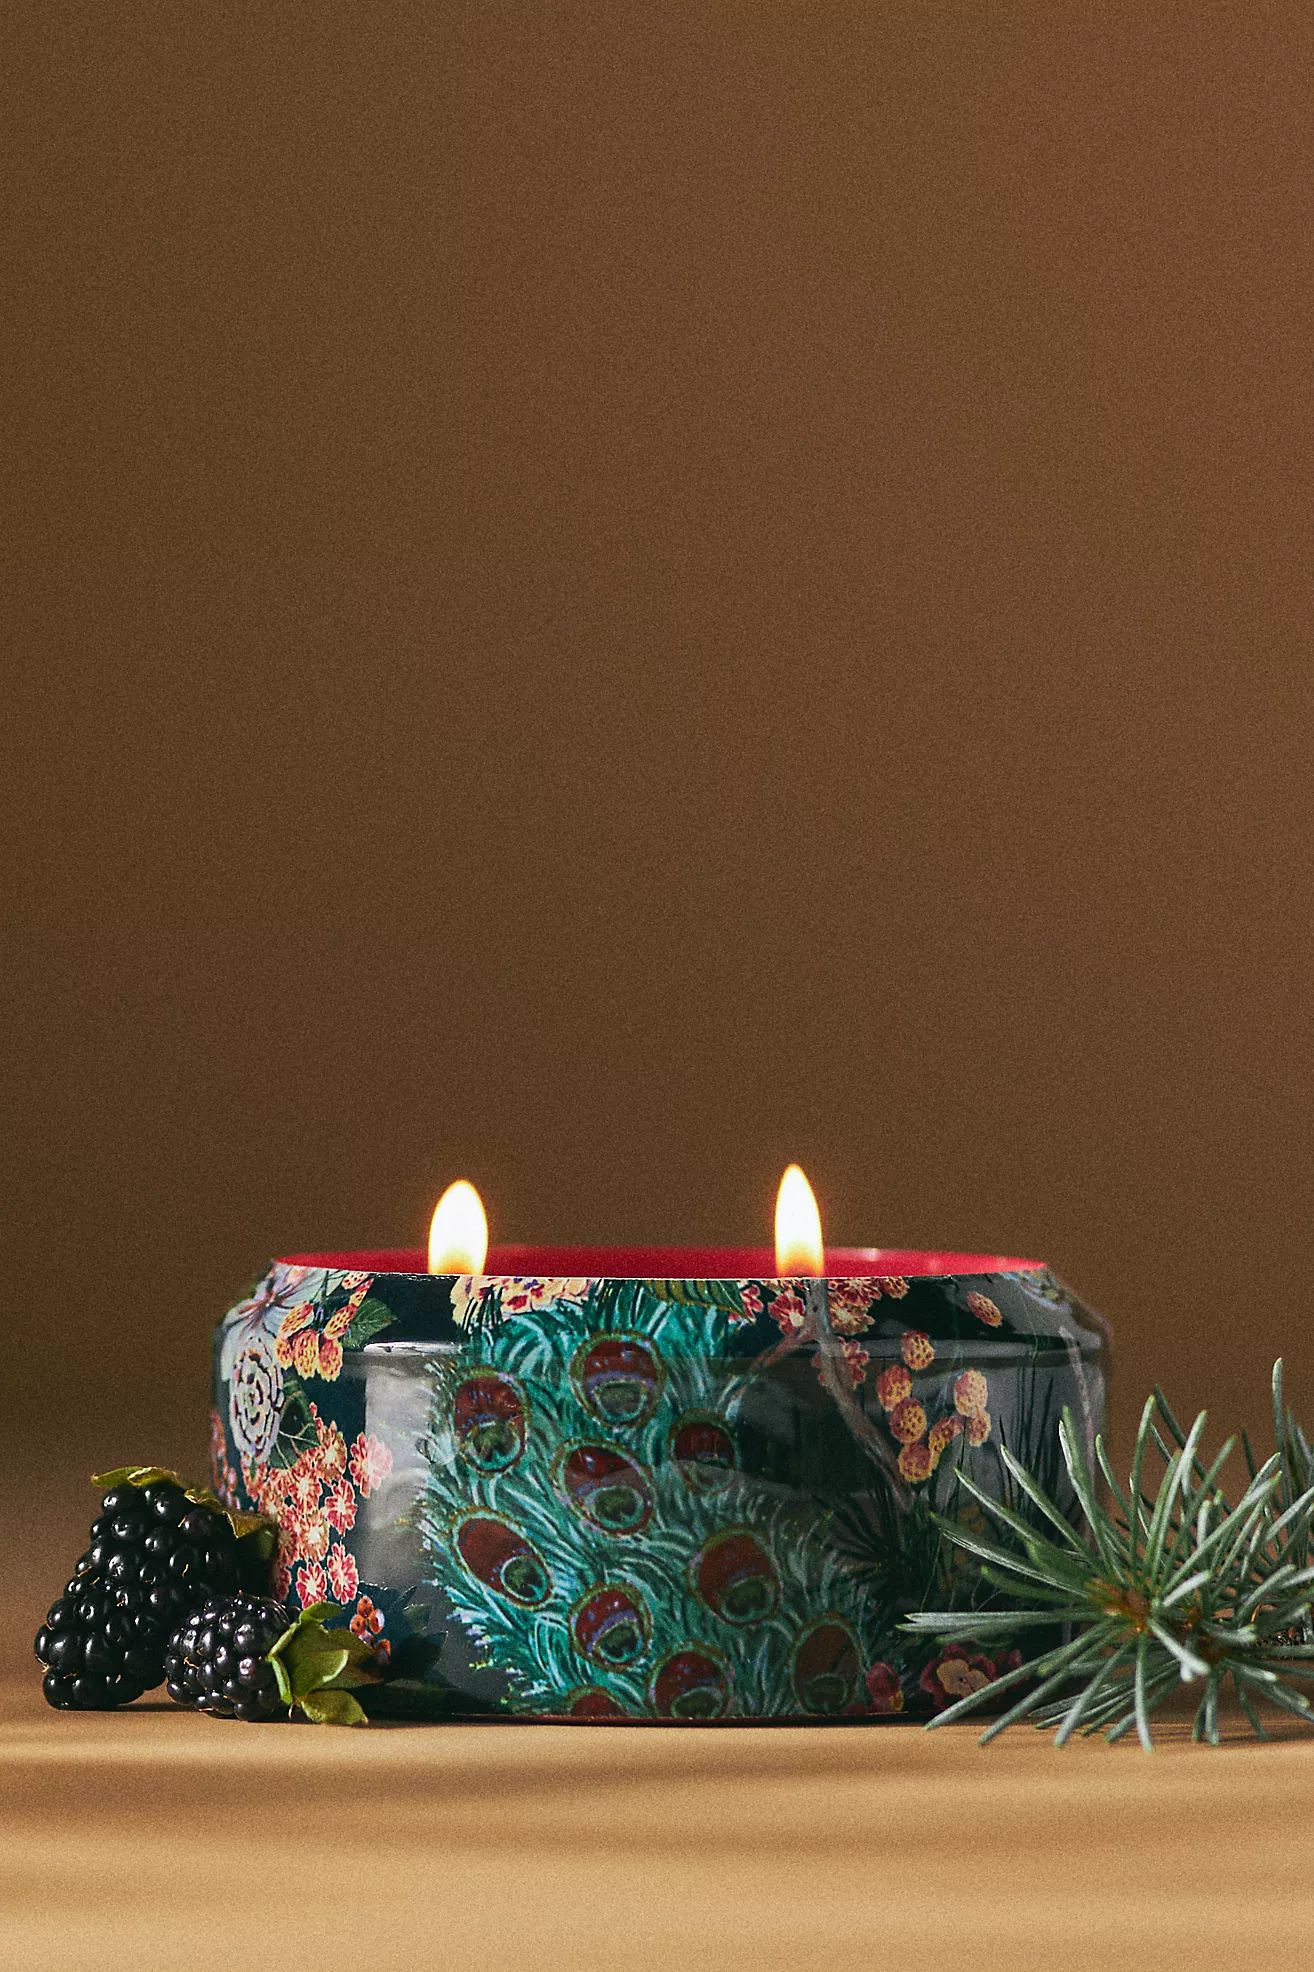 Liza Woody Blackberry Balsam Tin Candle | Anthropologie (US)